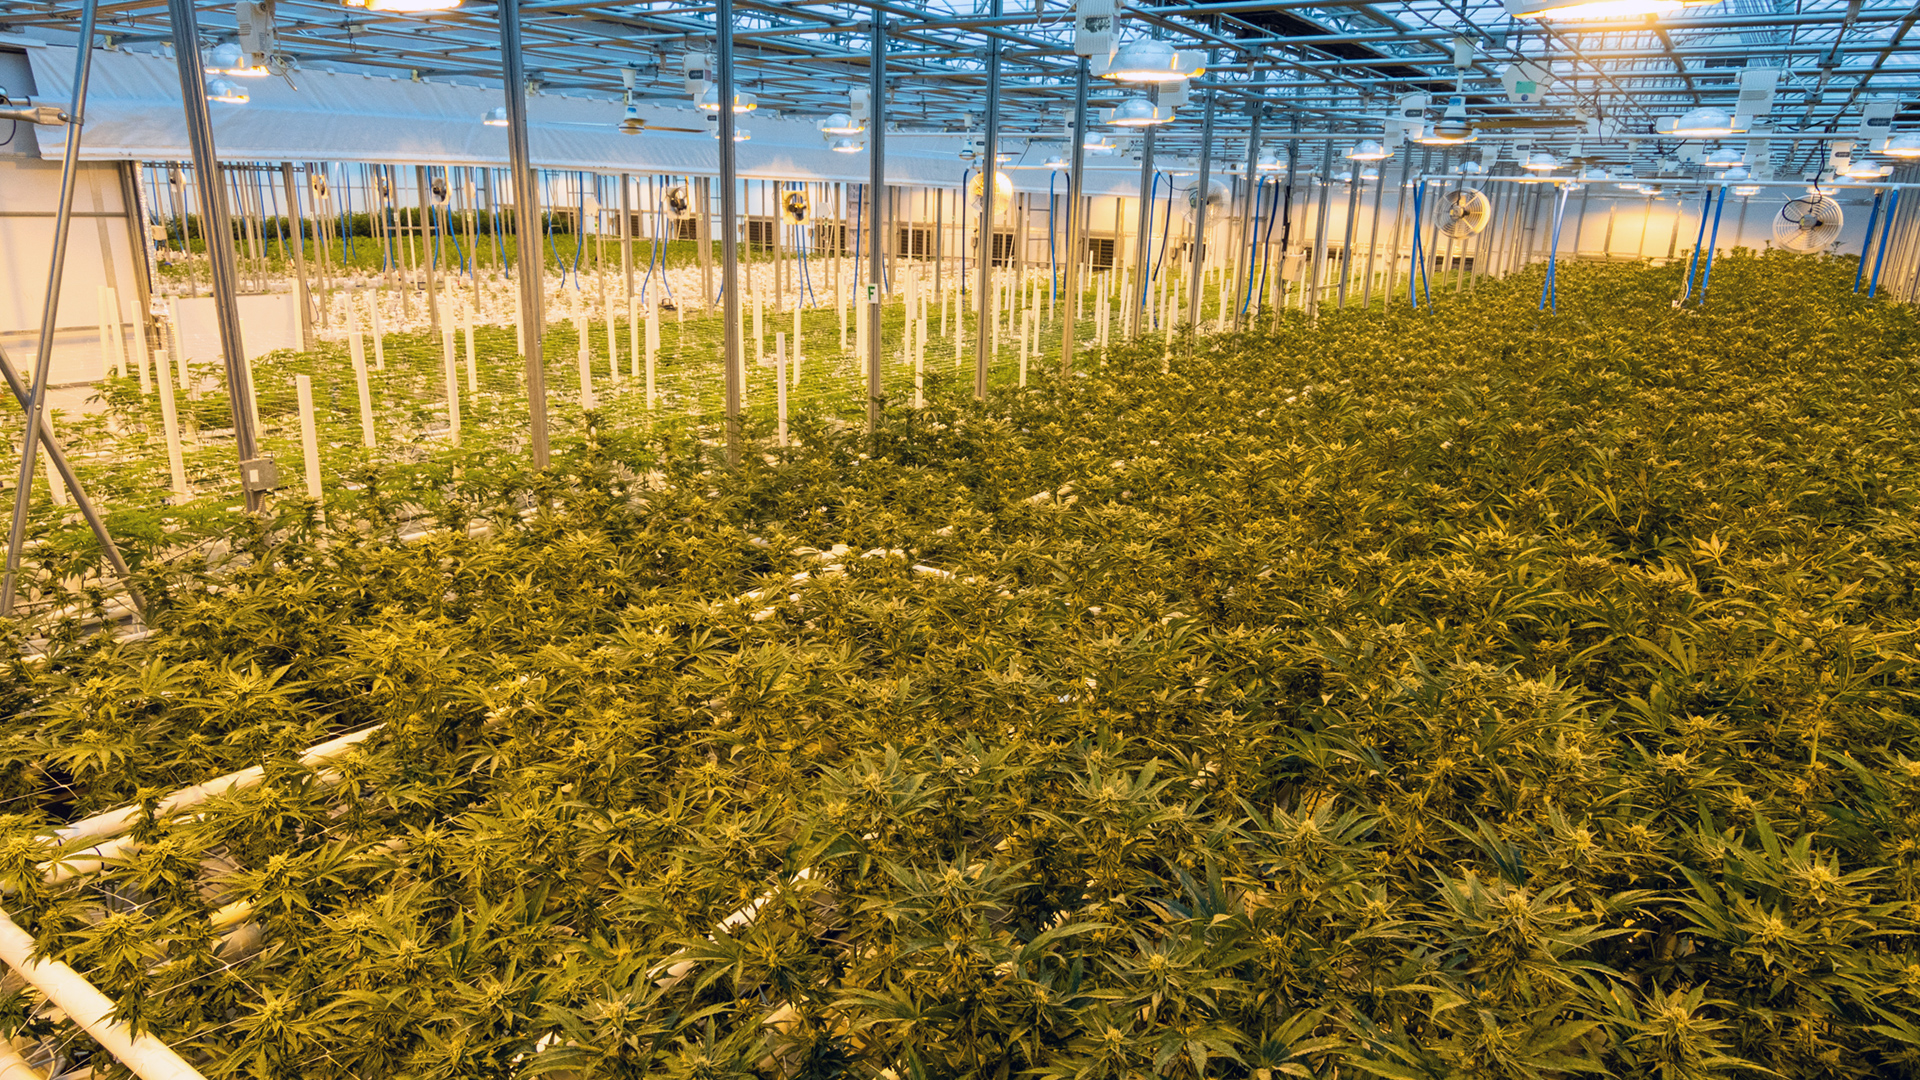 Image of nuEra's grow warehouse